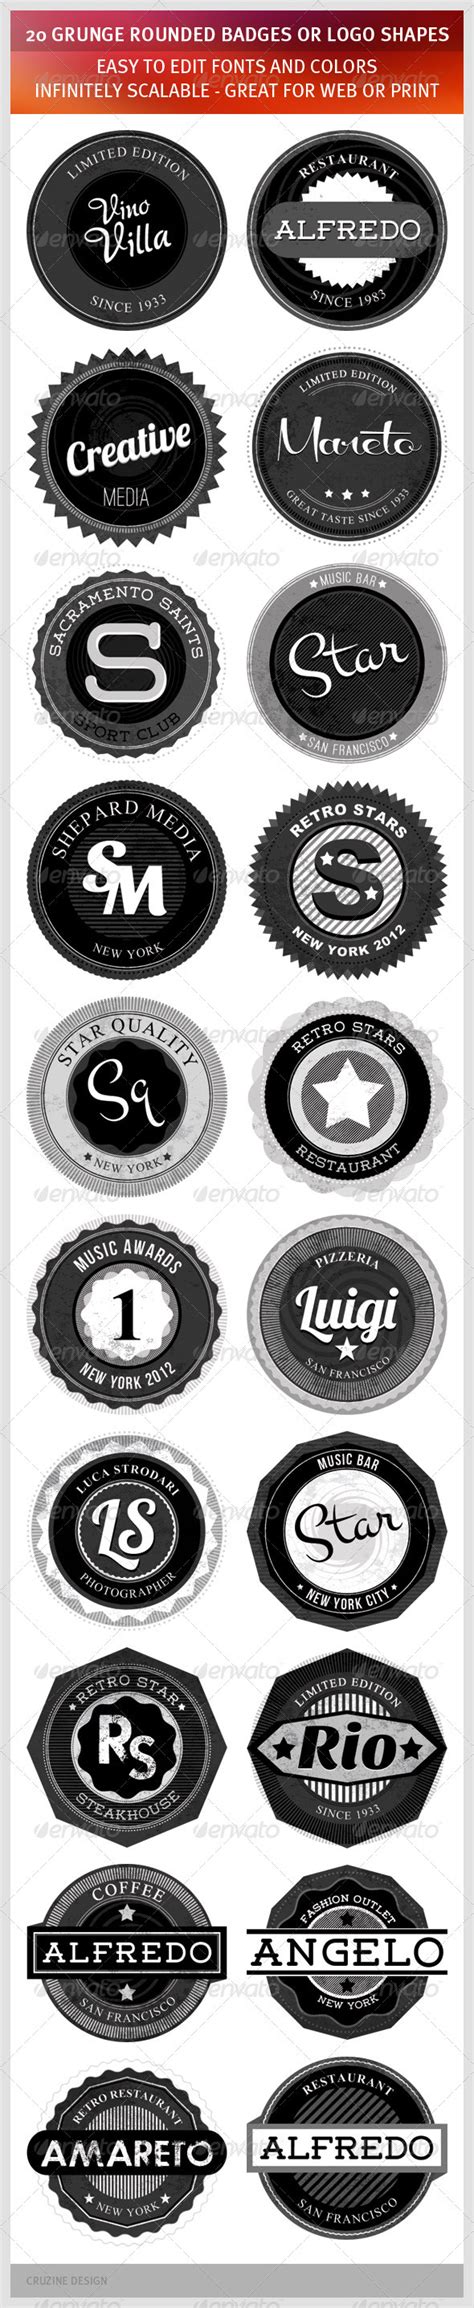 20 Grunge Rounded Badges Or Logo Shapes By Cruzine Graphicriver